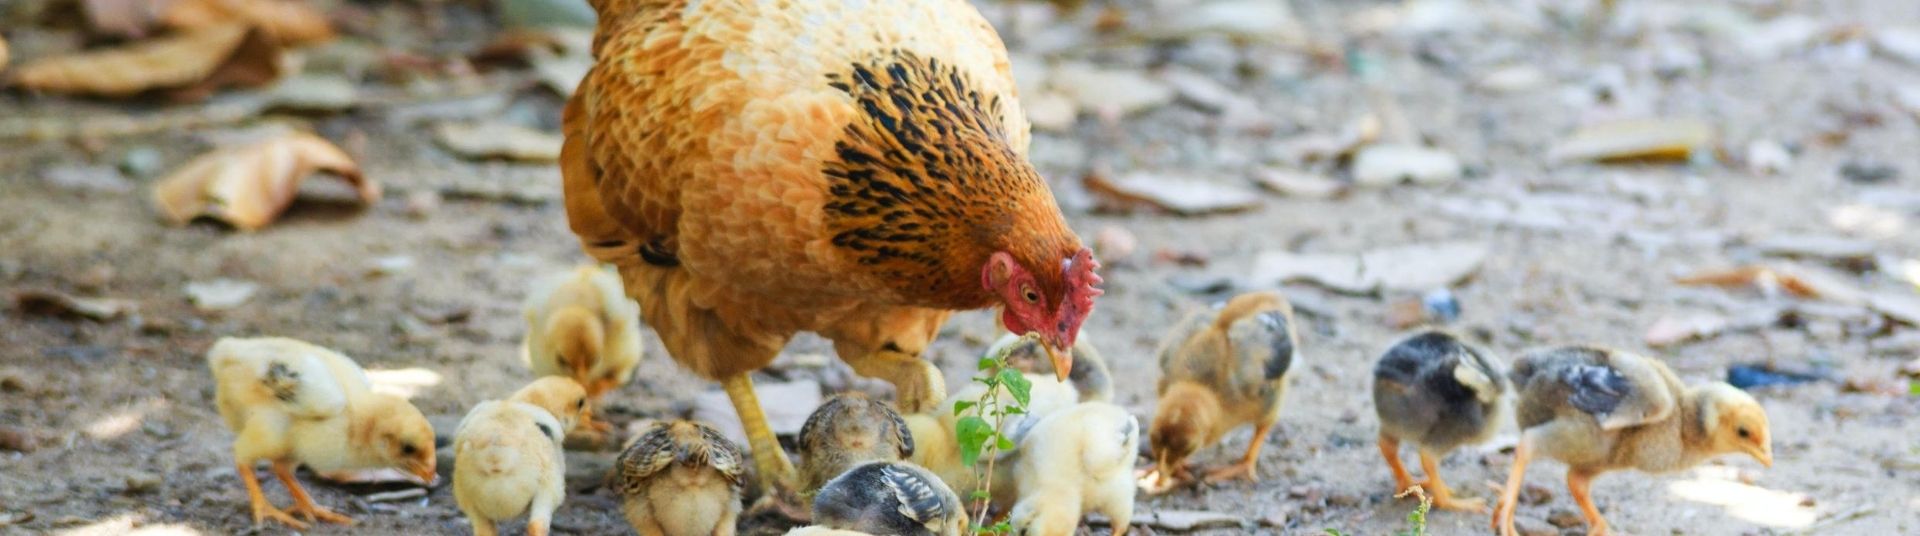 Backyard Chickens - The Key Issues